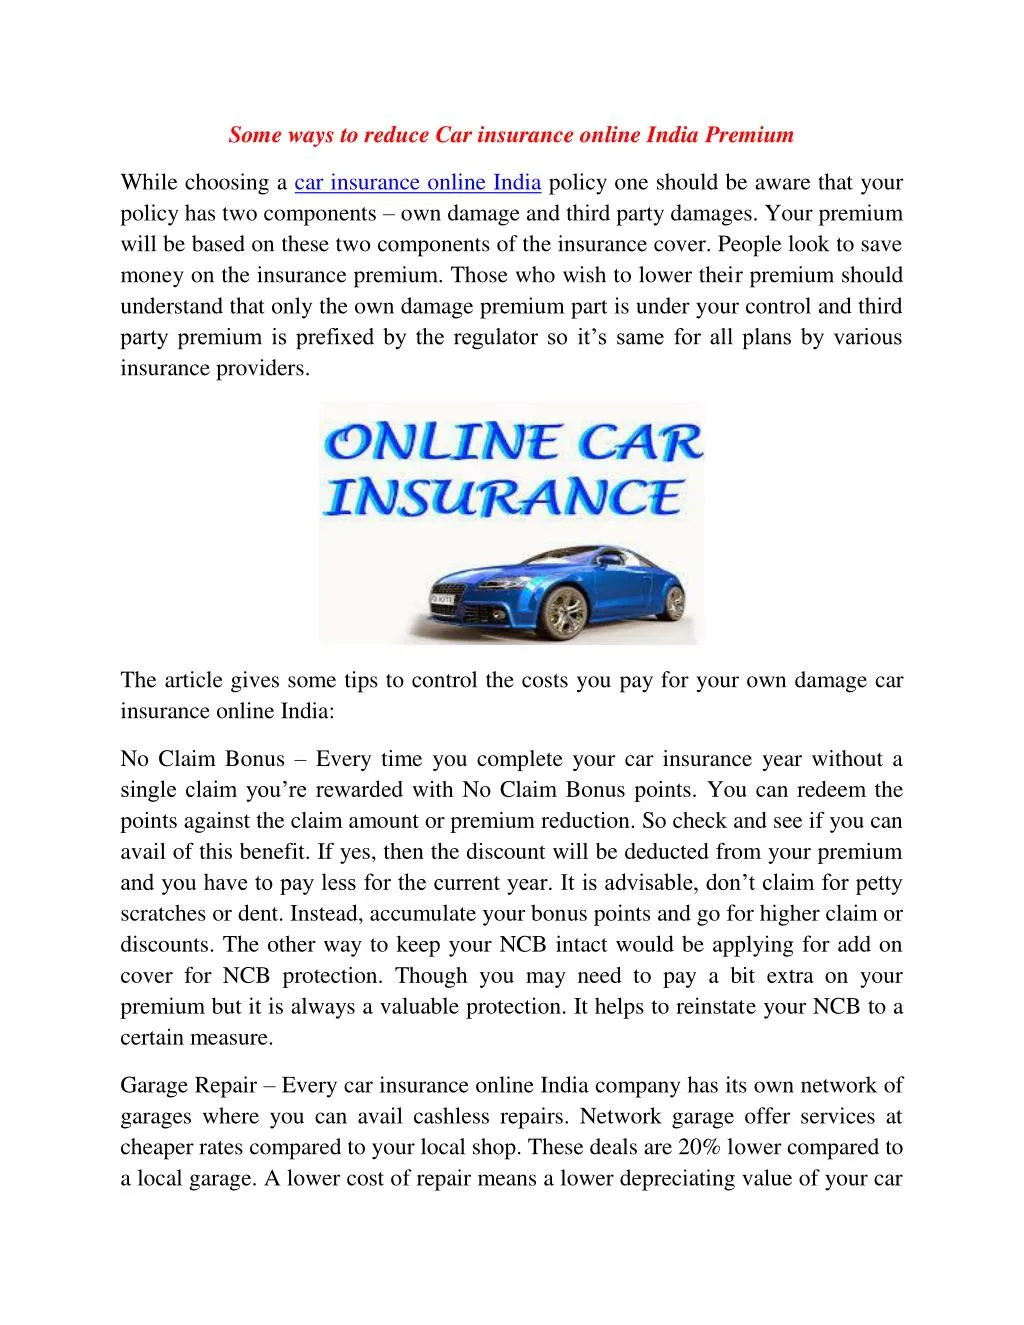 some ways to reduce car insurance online india